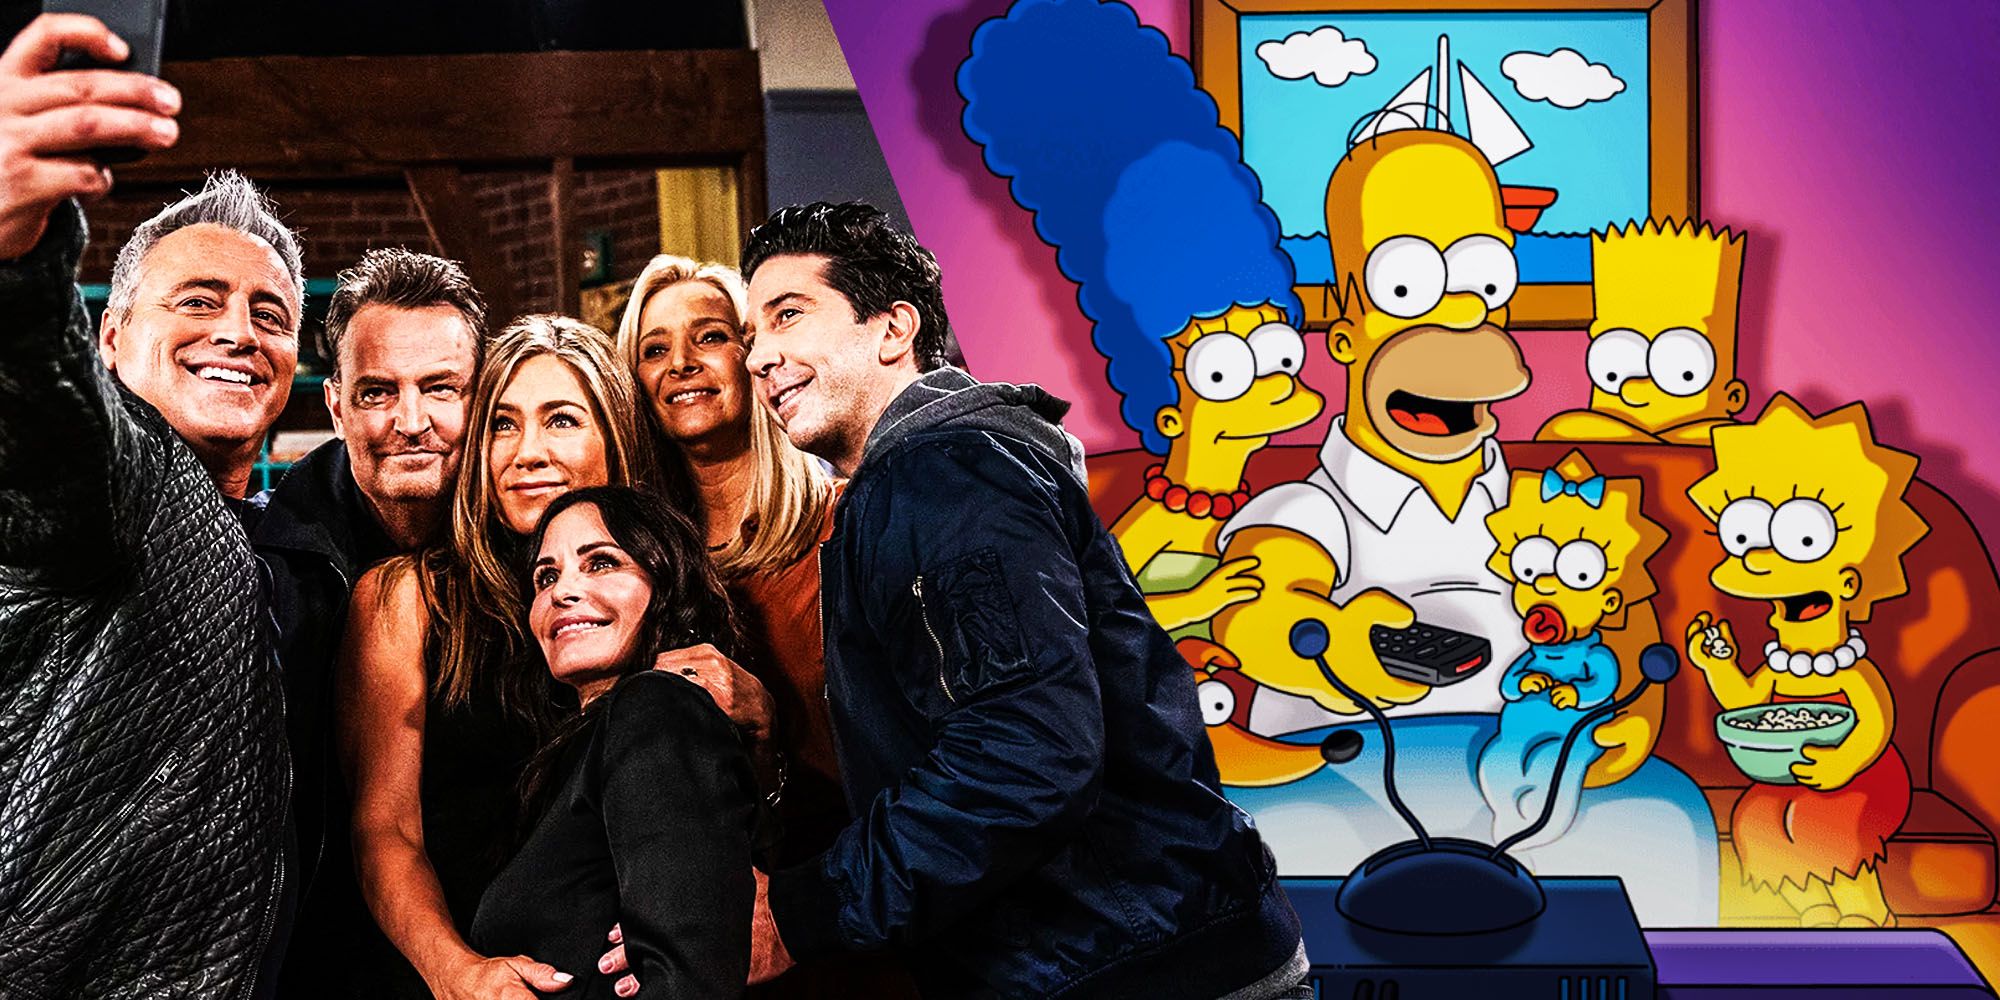 The simpsons perfect ending Friends reunion